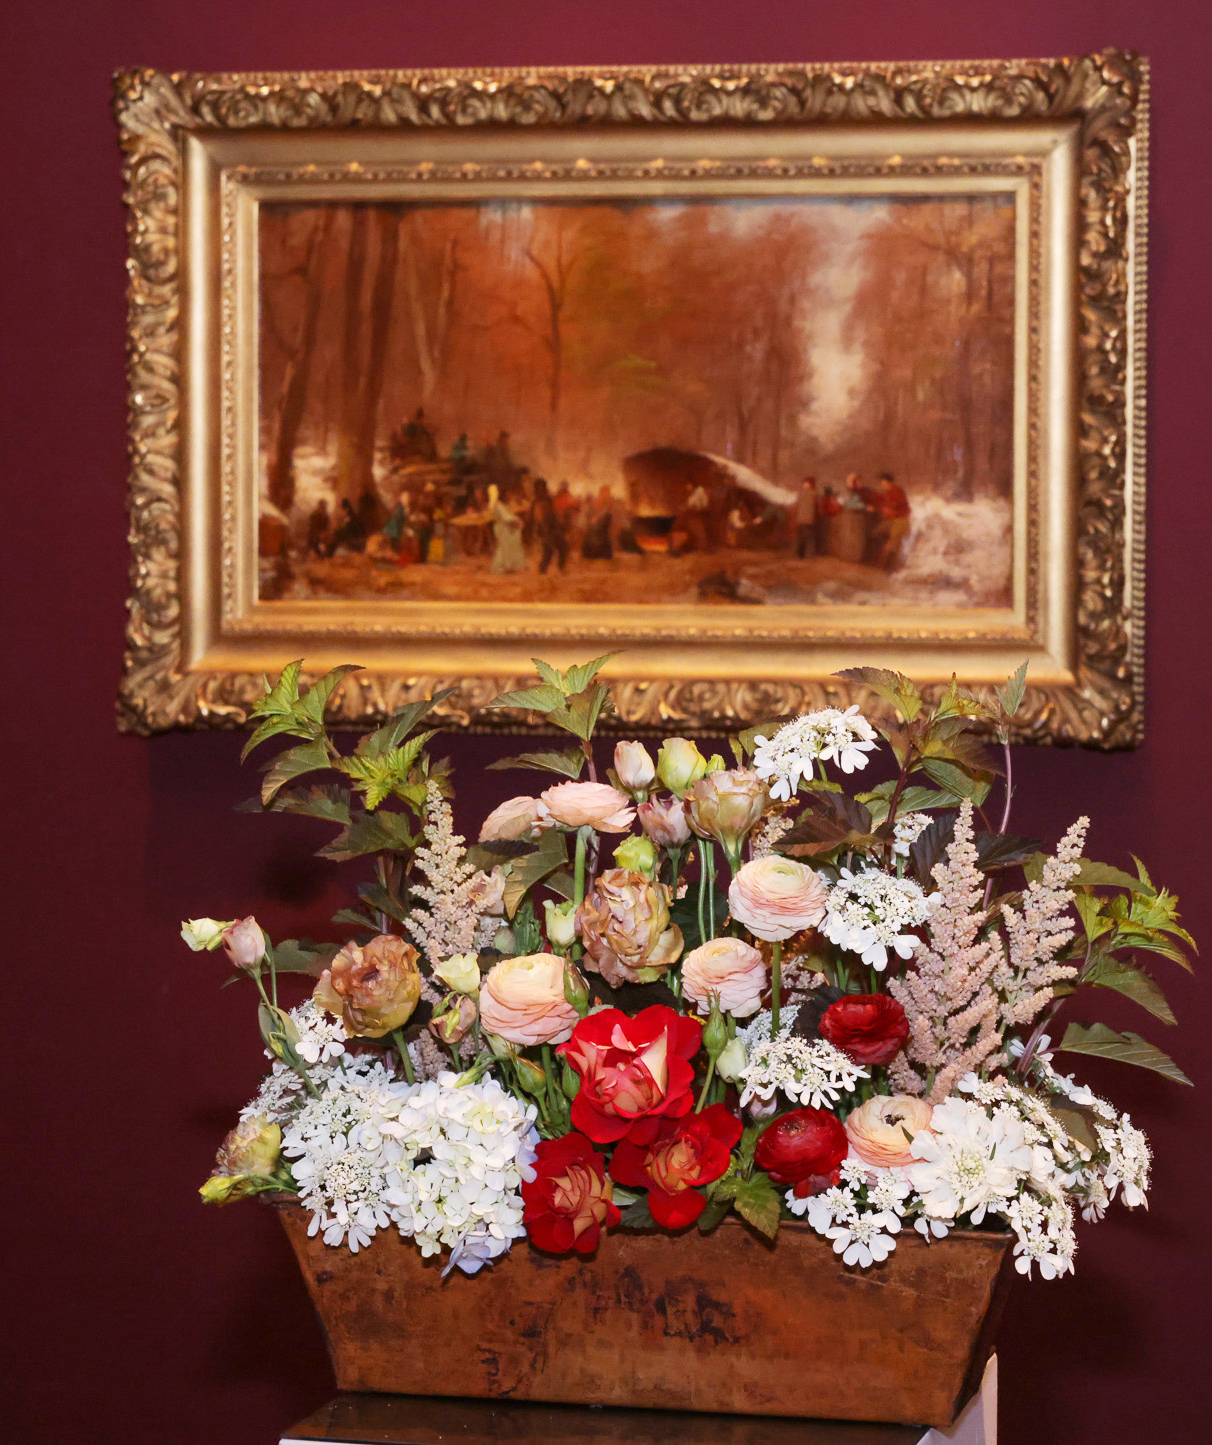 A gold-framed painting is hung on a maroon wall. Below it is a wooden planter with a colorful arrangement of flowers, featuring red, white, and pink blossoms.